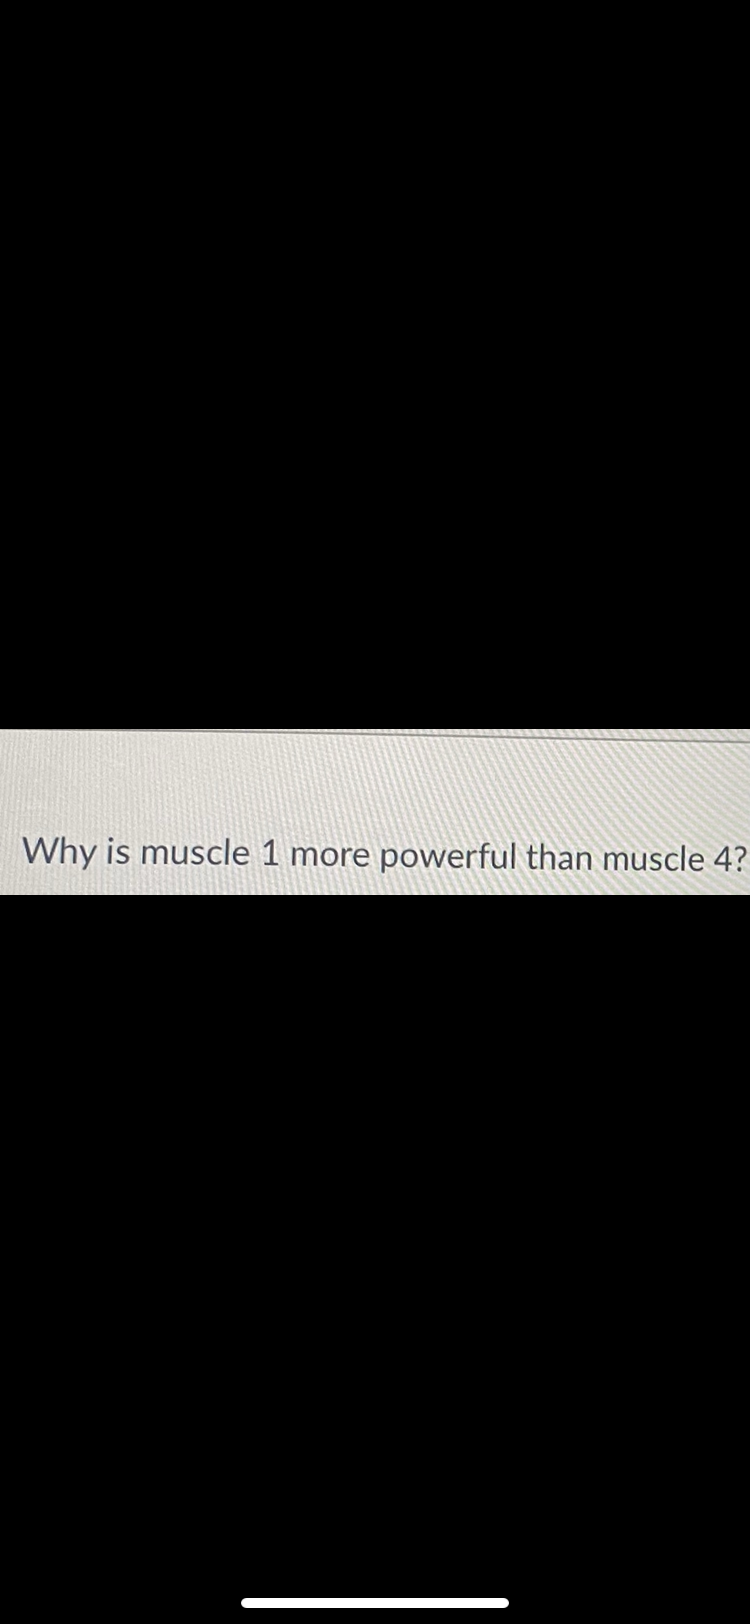 Why is muscle 1 more powerful than muscle 4?
